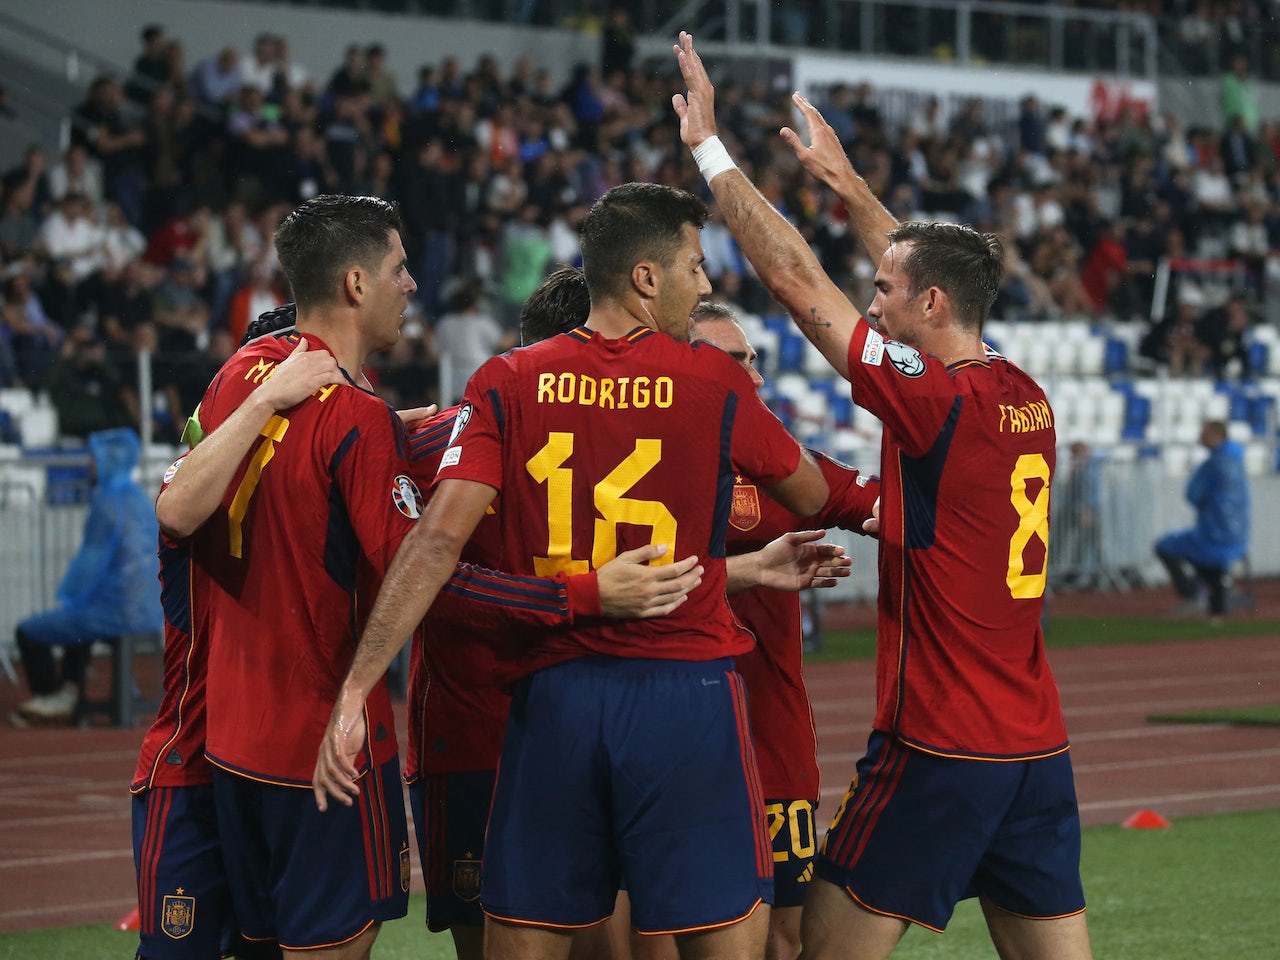 Spain - Conil CF - Results, fixtures, squad, statistics, photos, videos and  news - Soccerway